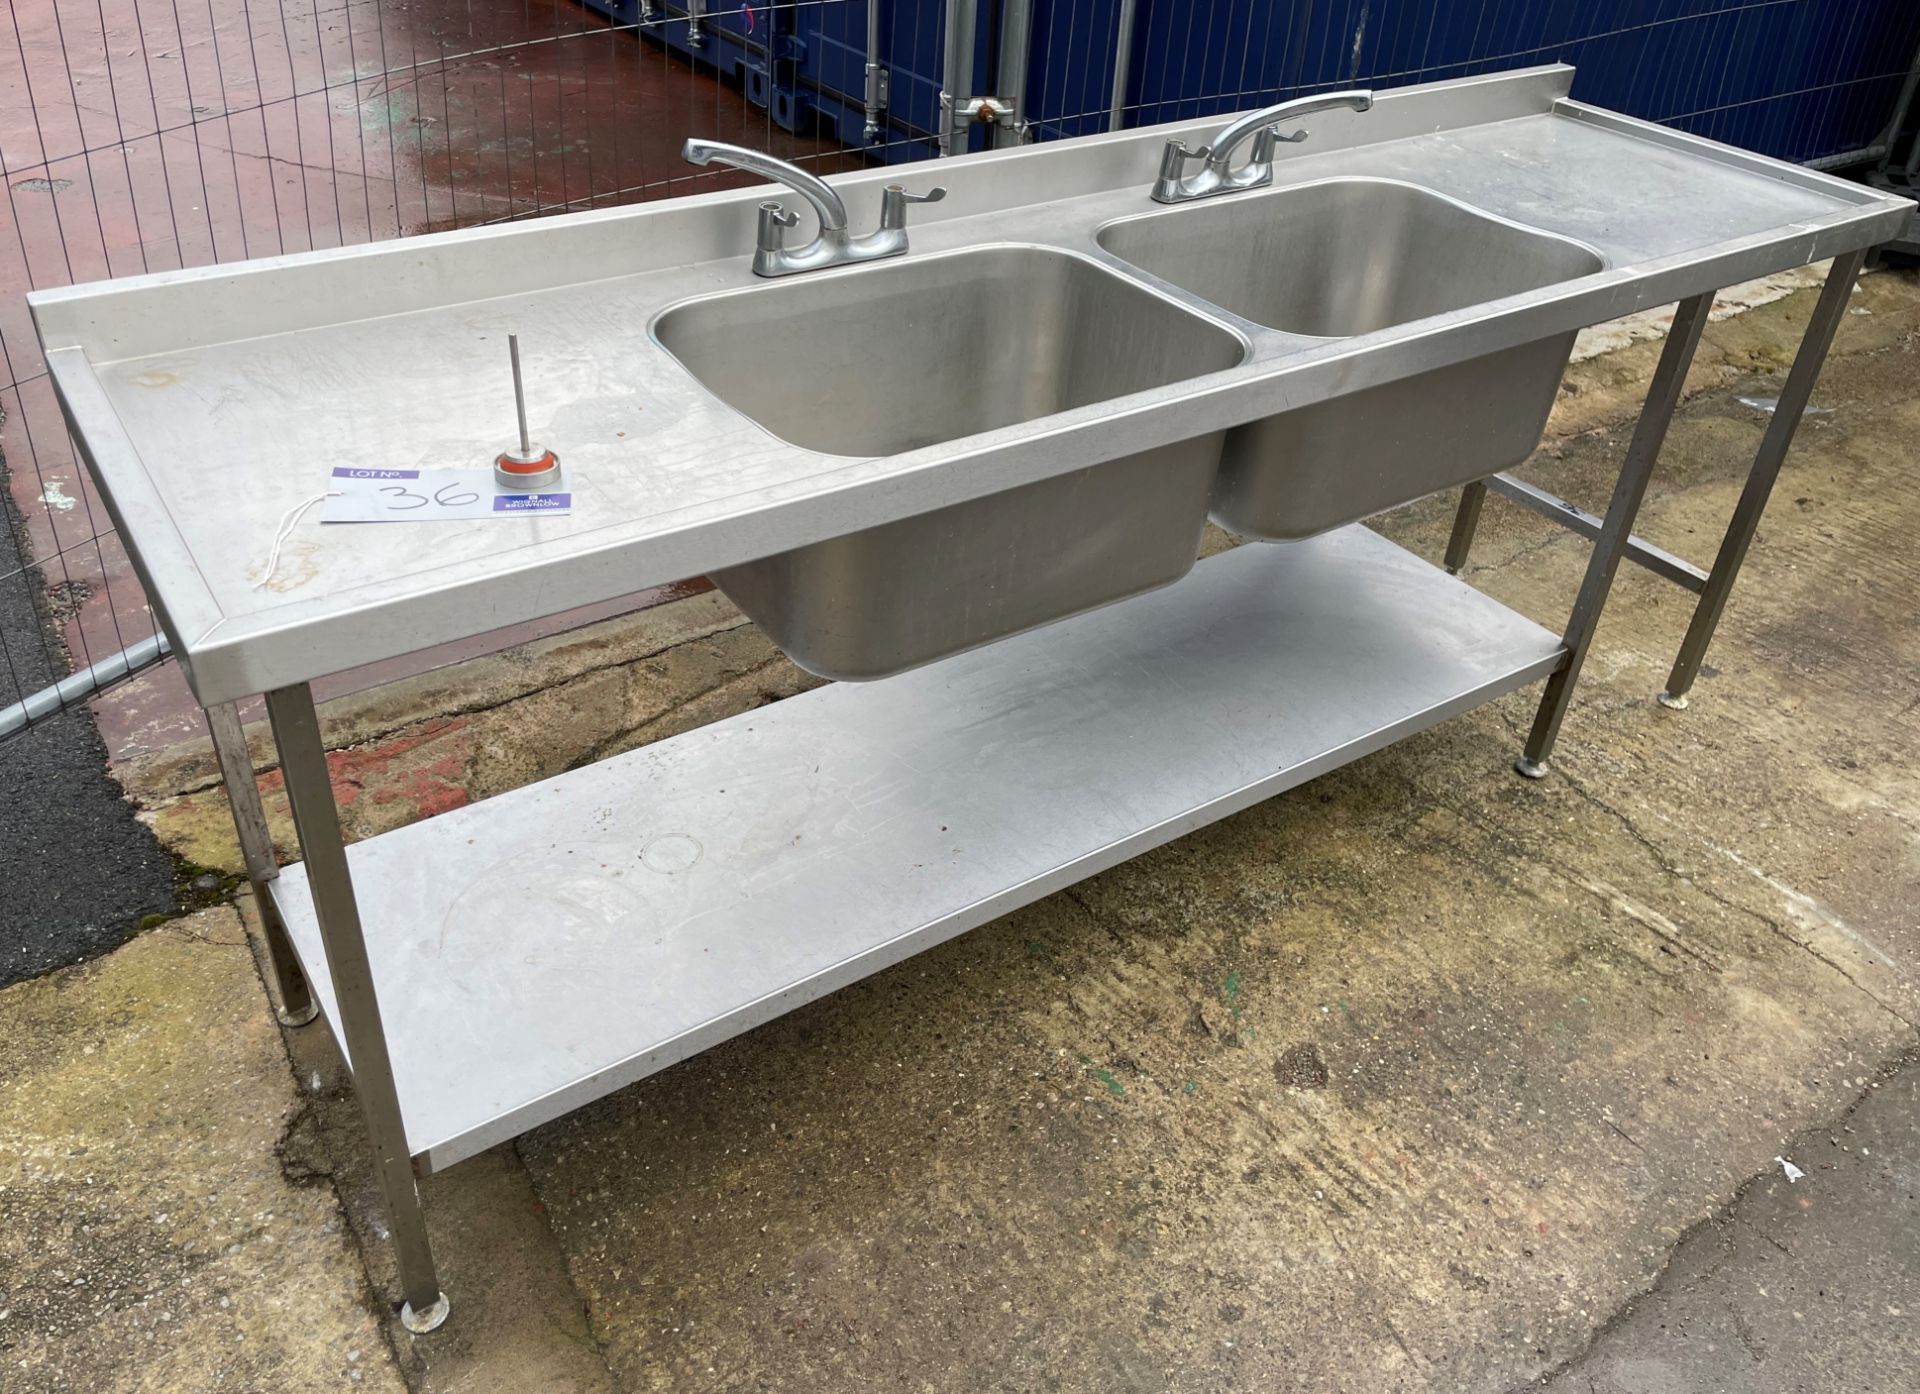 A Stainless Steel Double Bowl Double Drainer Sink Unit, 240cm x 65cm x 90cm with undershelf (located